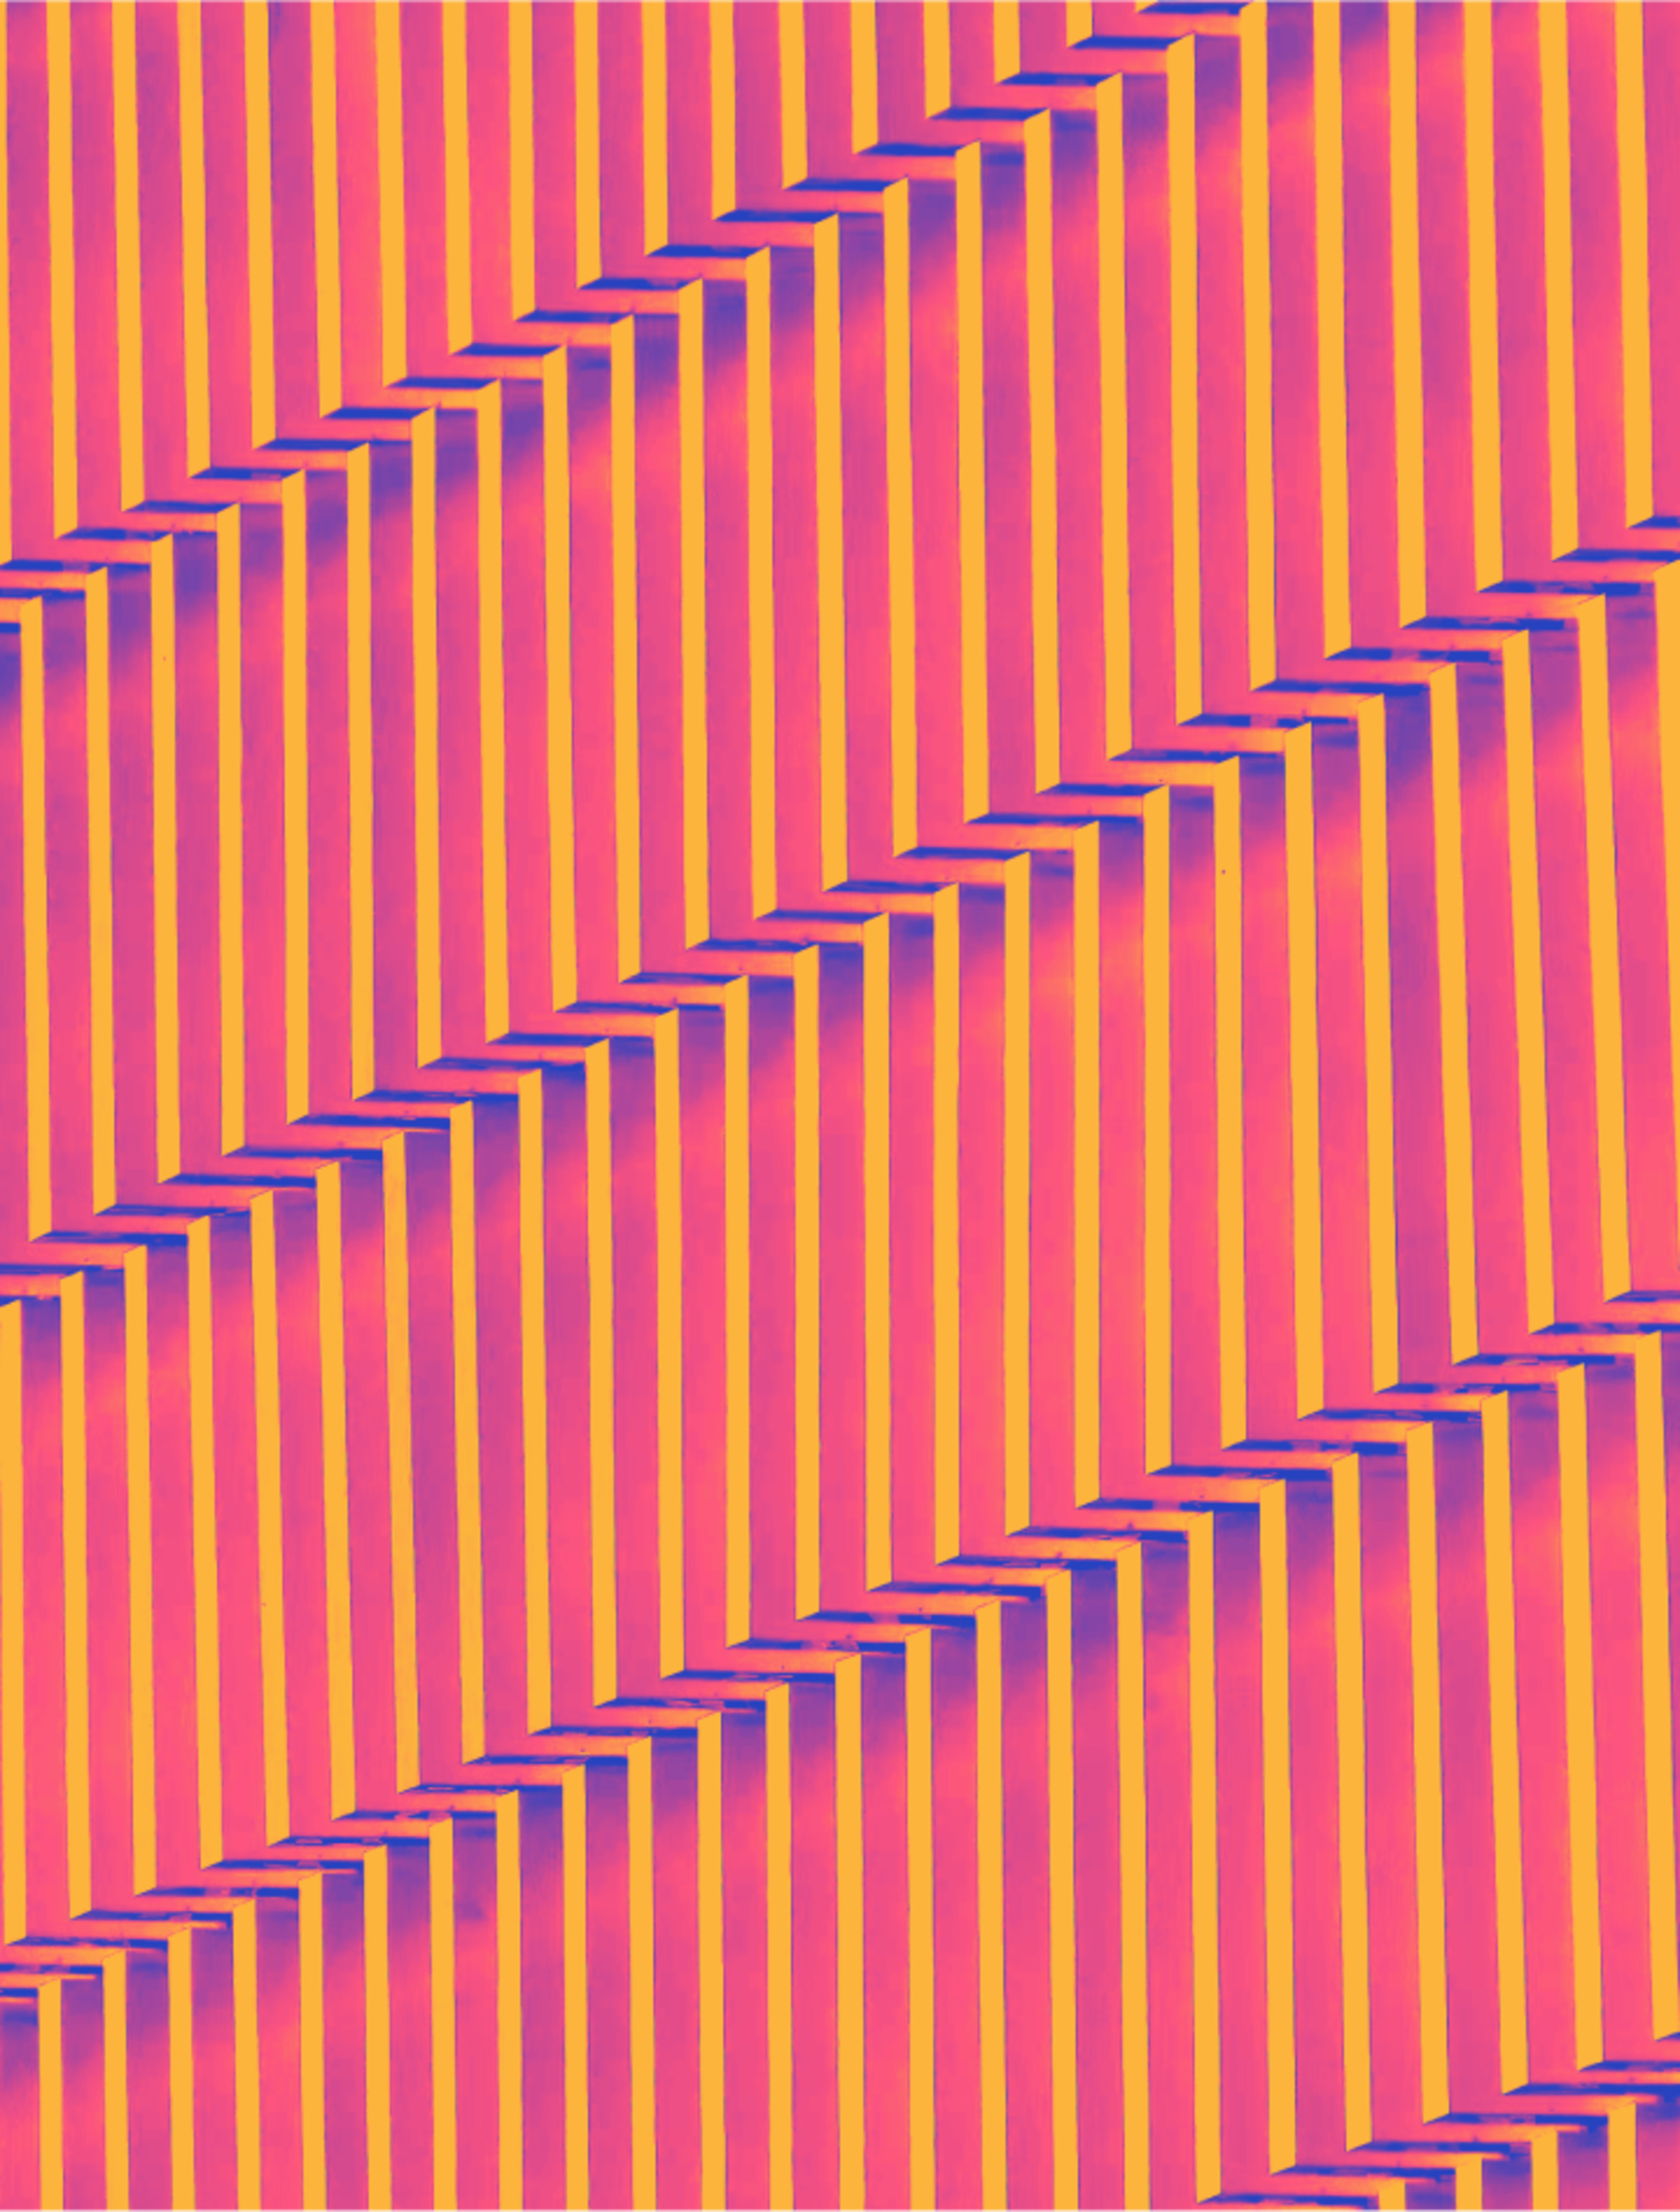 A pattern of cascading lines.